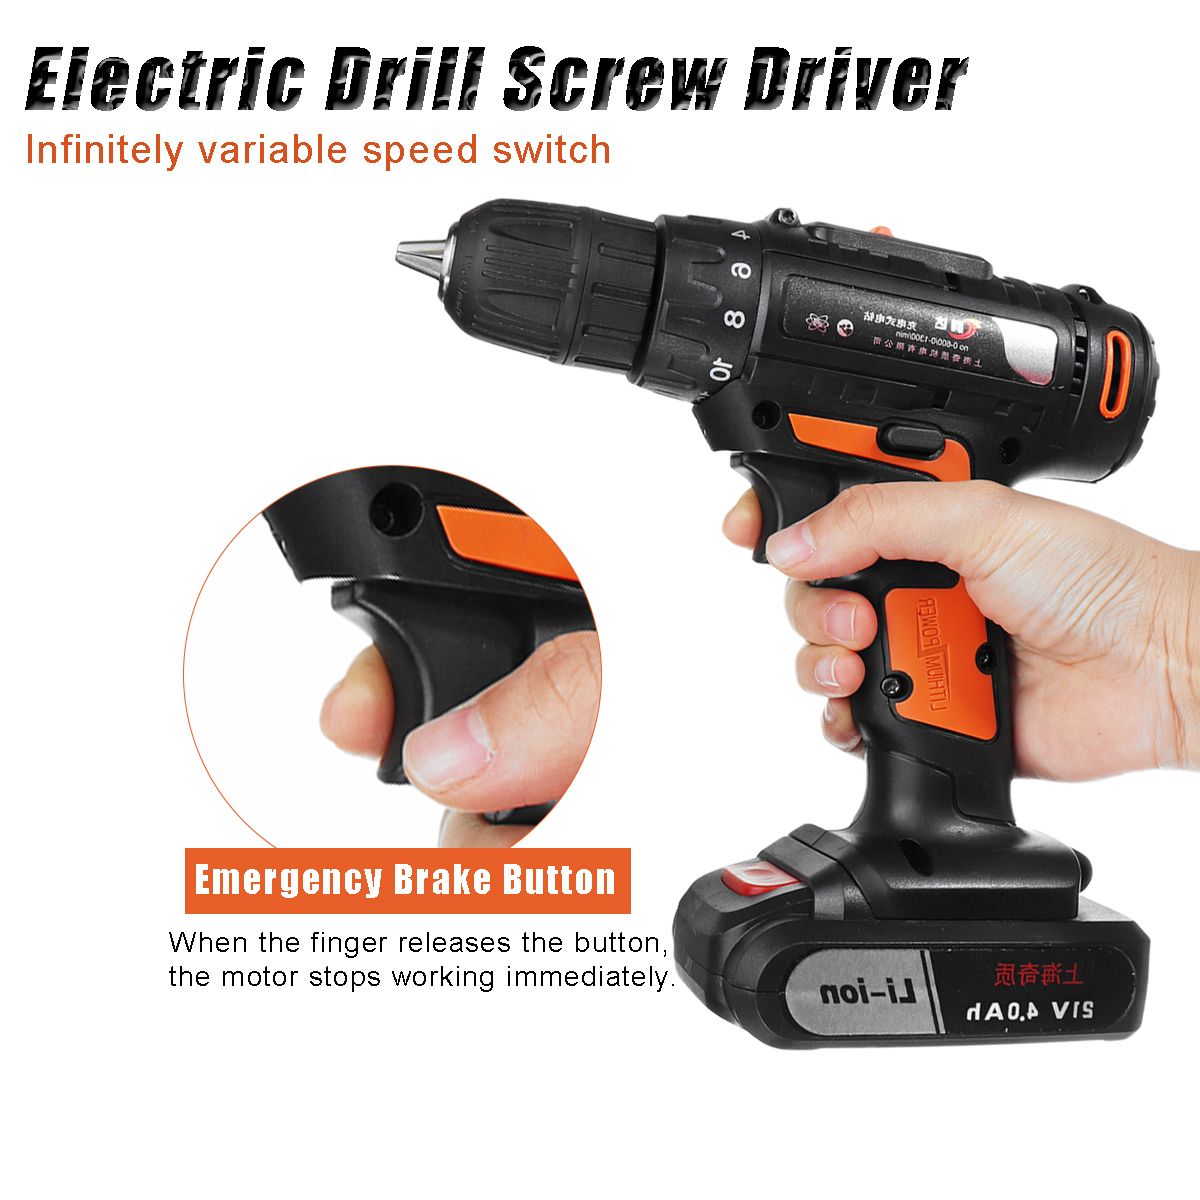 21V-4000mAh-Cordless-Rechargeable-Power-Drill-Driver-Electric-Screwdriver-with-1-or-2-Li-ion-Battery-1394607